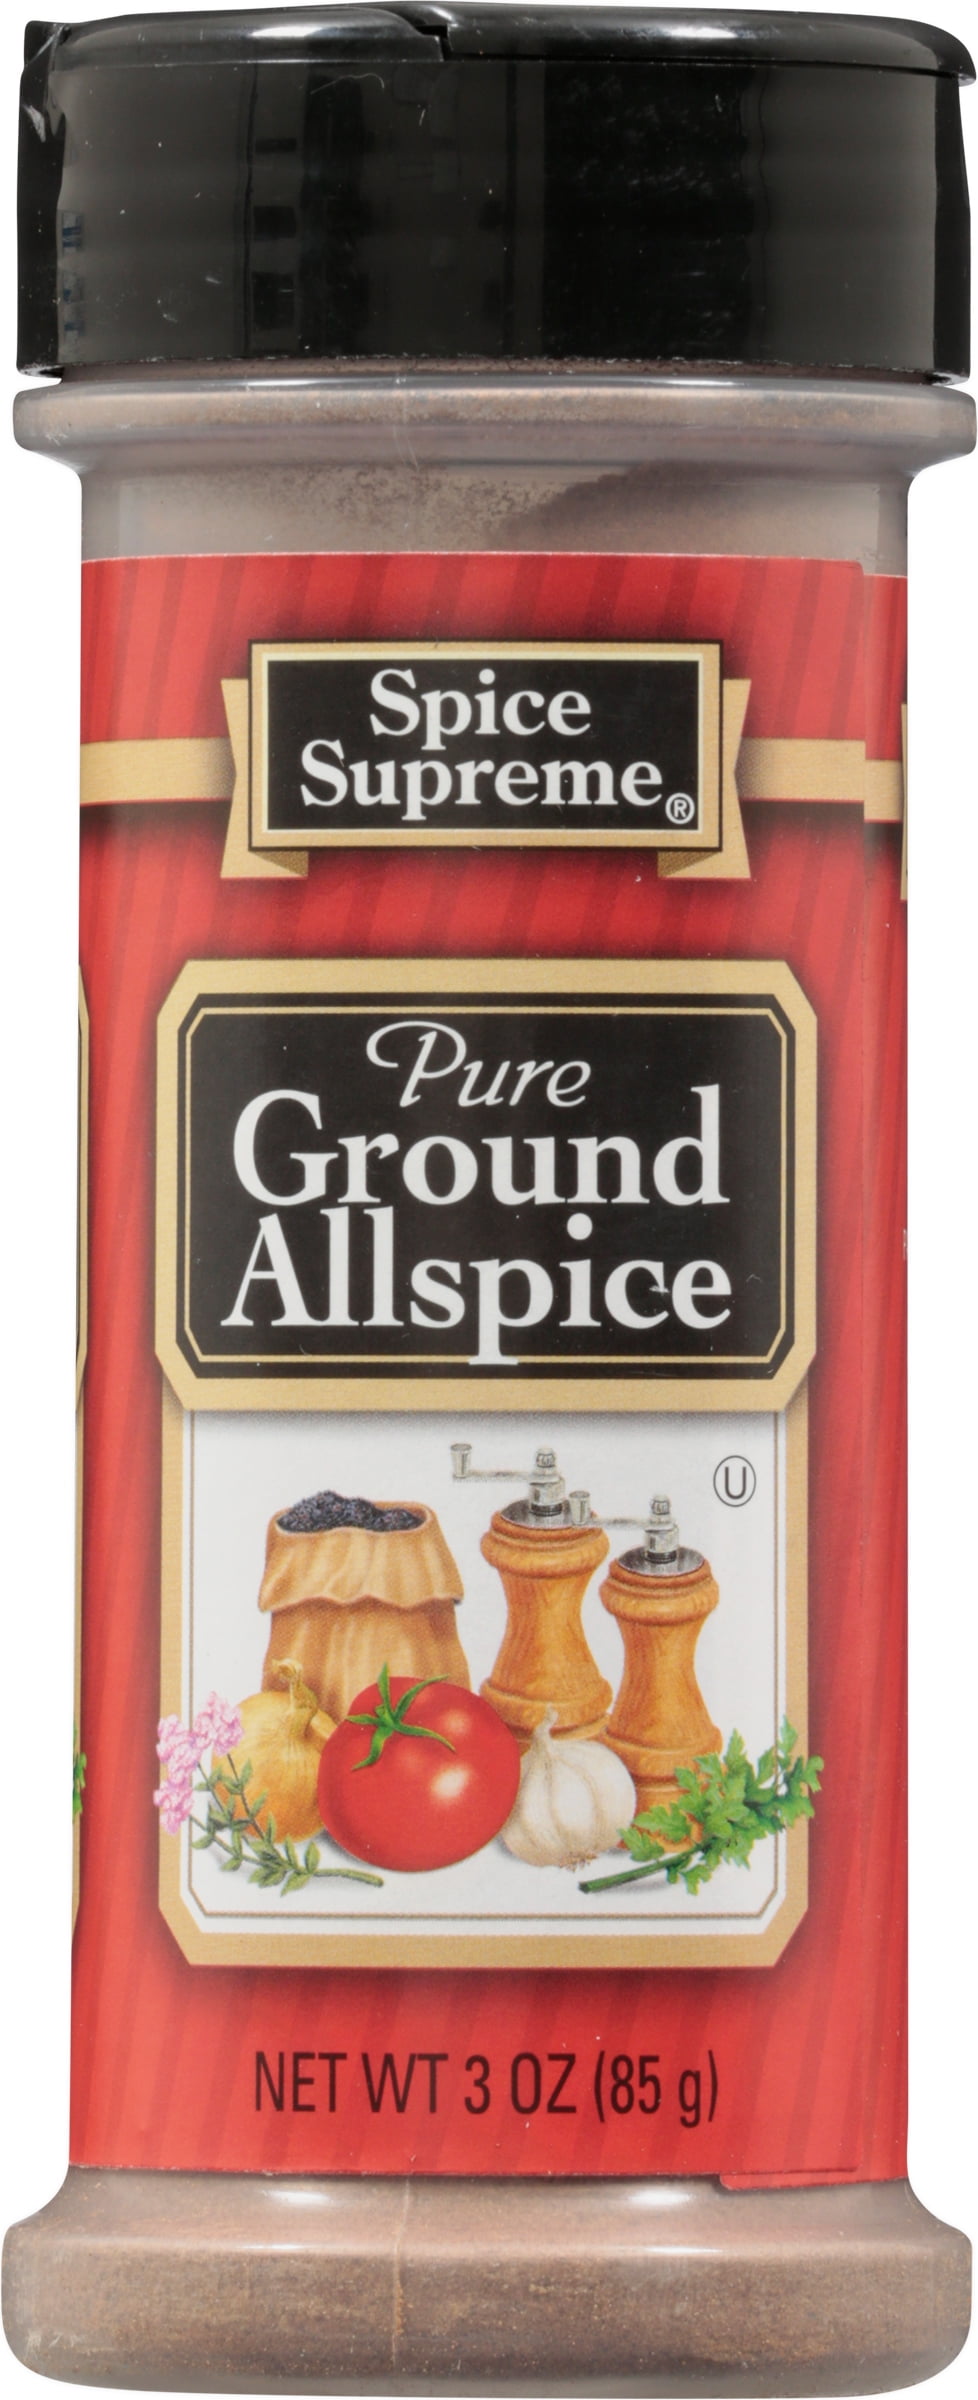 Spice Supreme Complete Seasoning 8 Oz (227 G) - Pack of 3